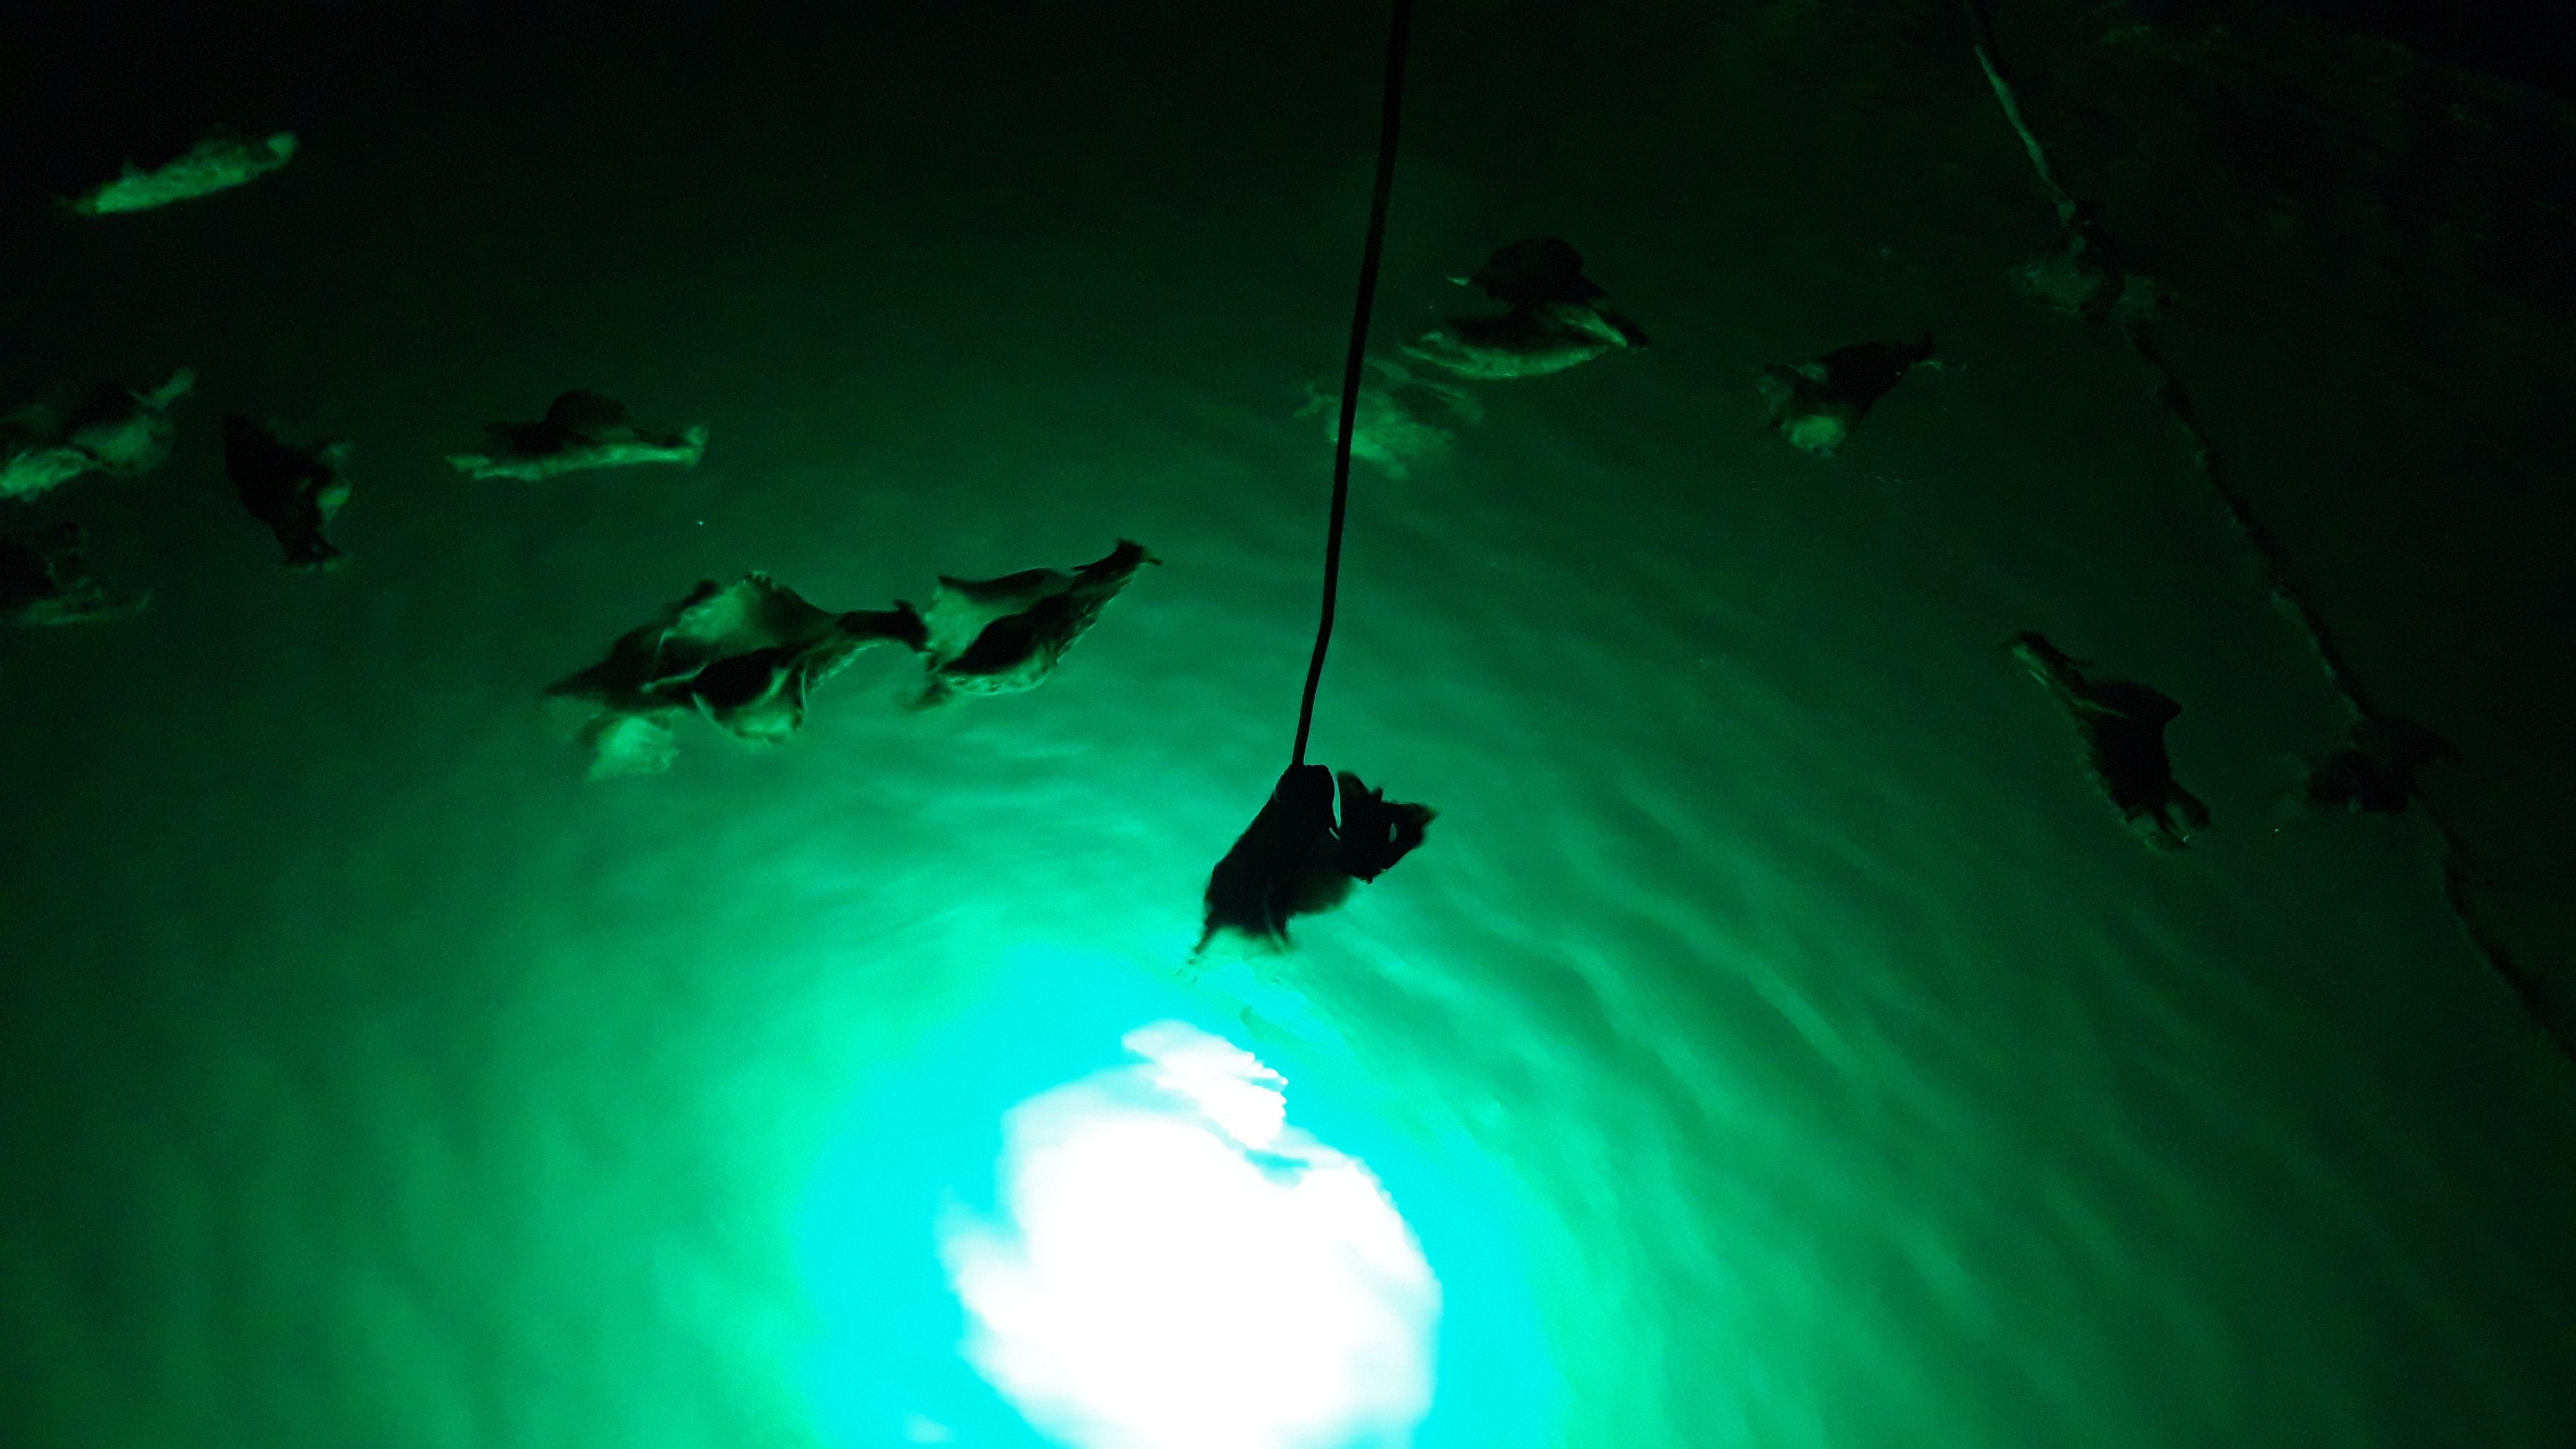 Catfish swarm Green Blob Underwater Fishing Light, We want to thank Jared  for sending in this awesome video!